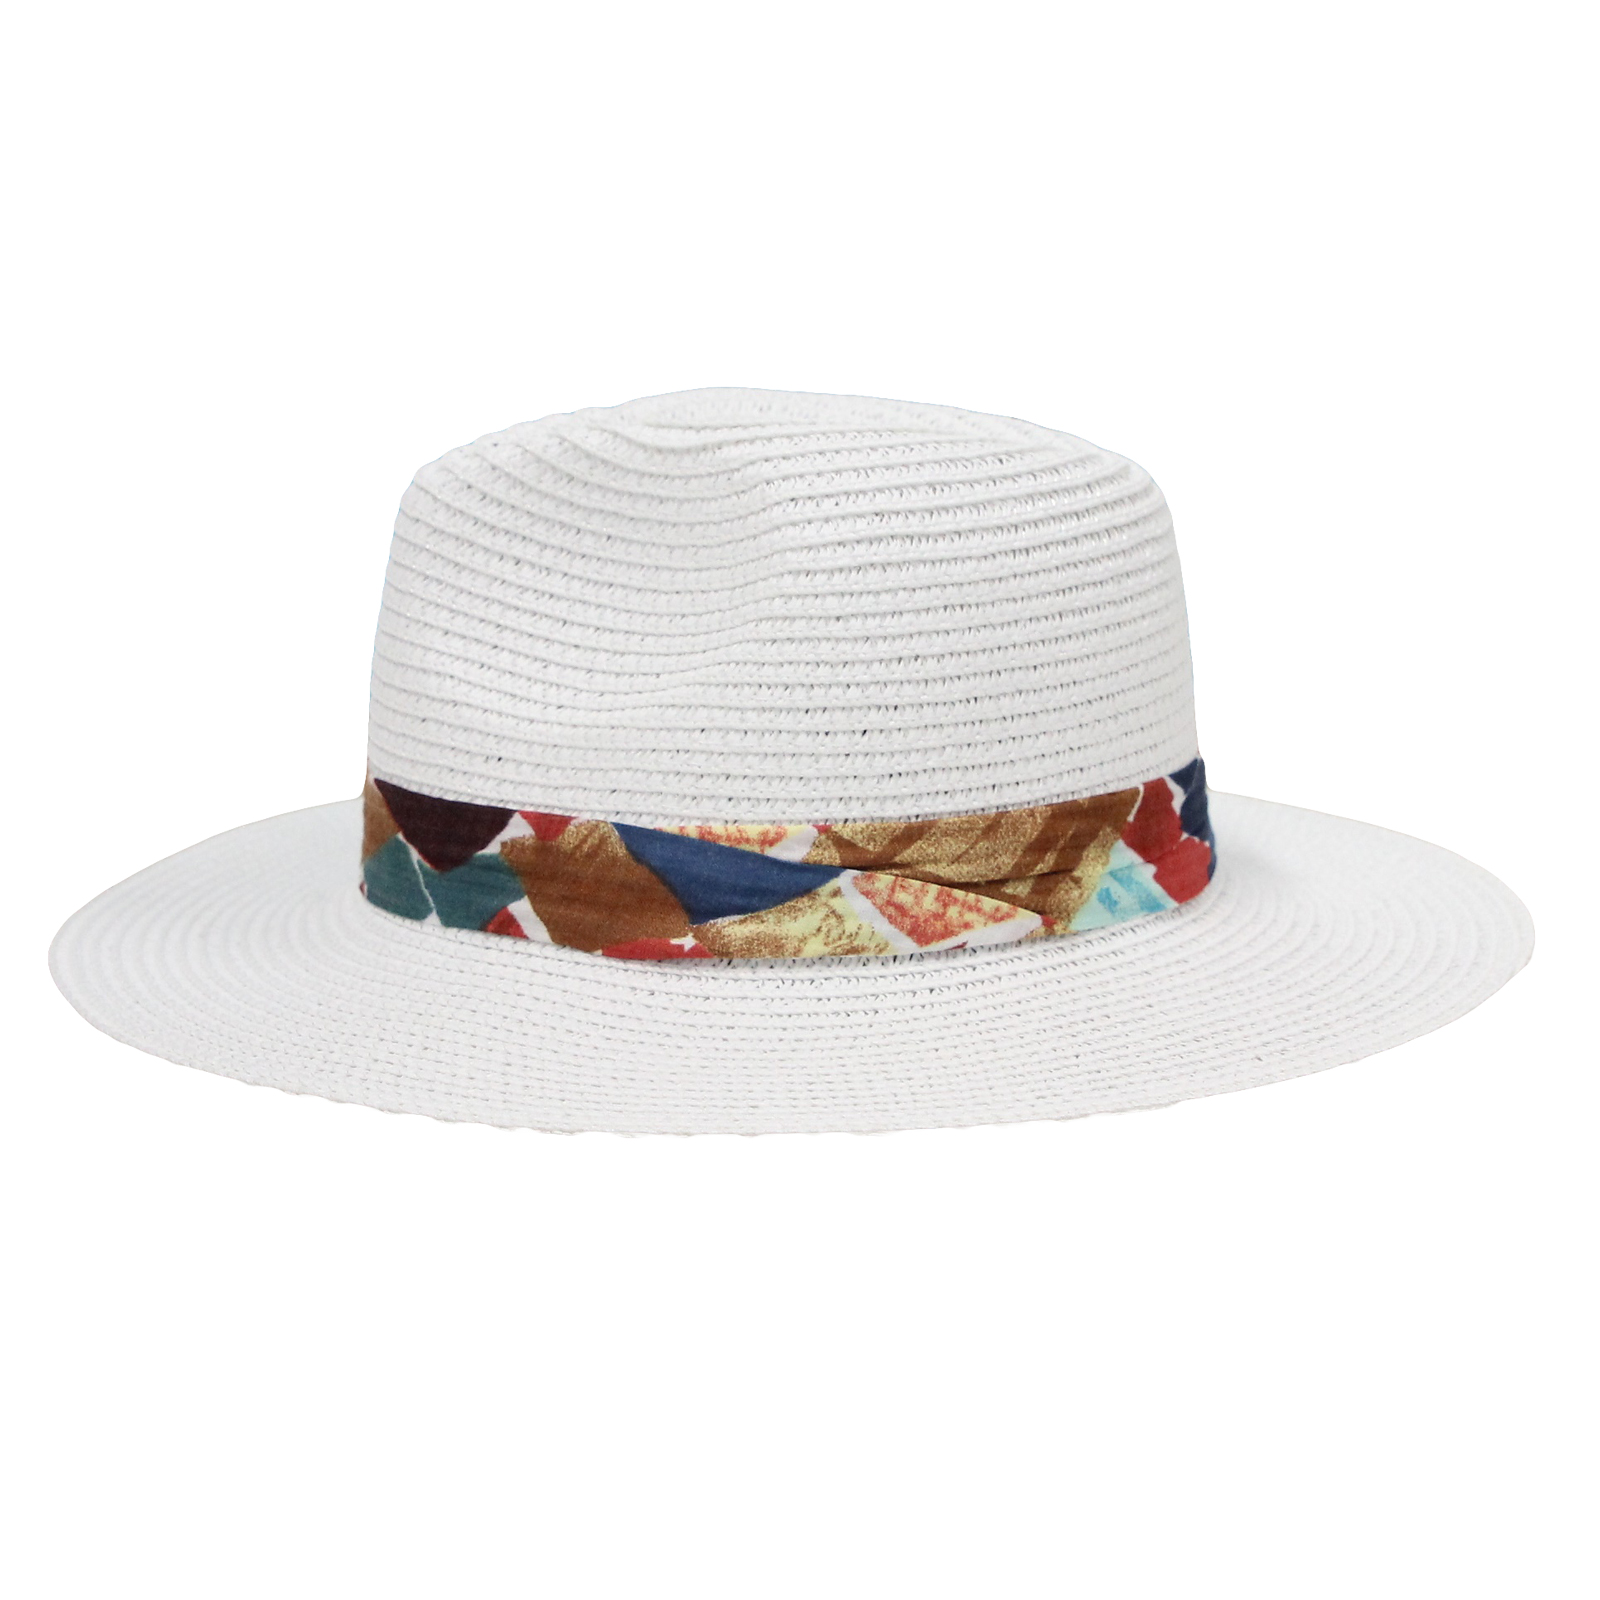 WITHMOONS Paperstraw Mesh Fedora Panama Sun Summer Beach Hat Banded ...